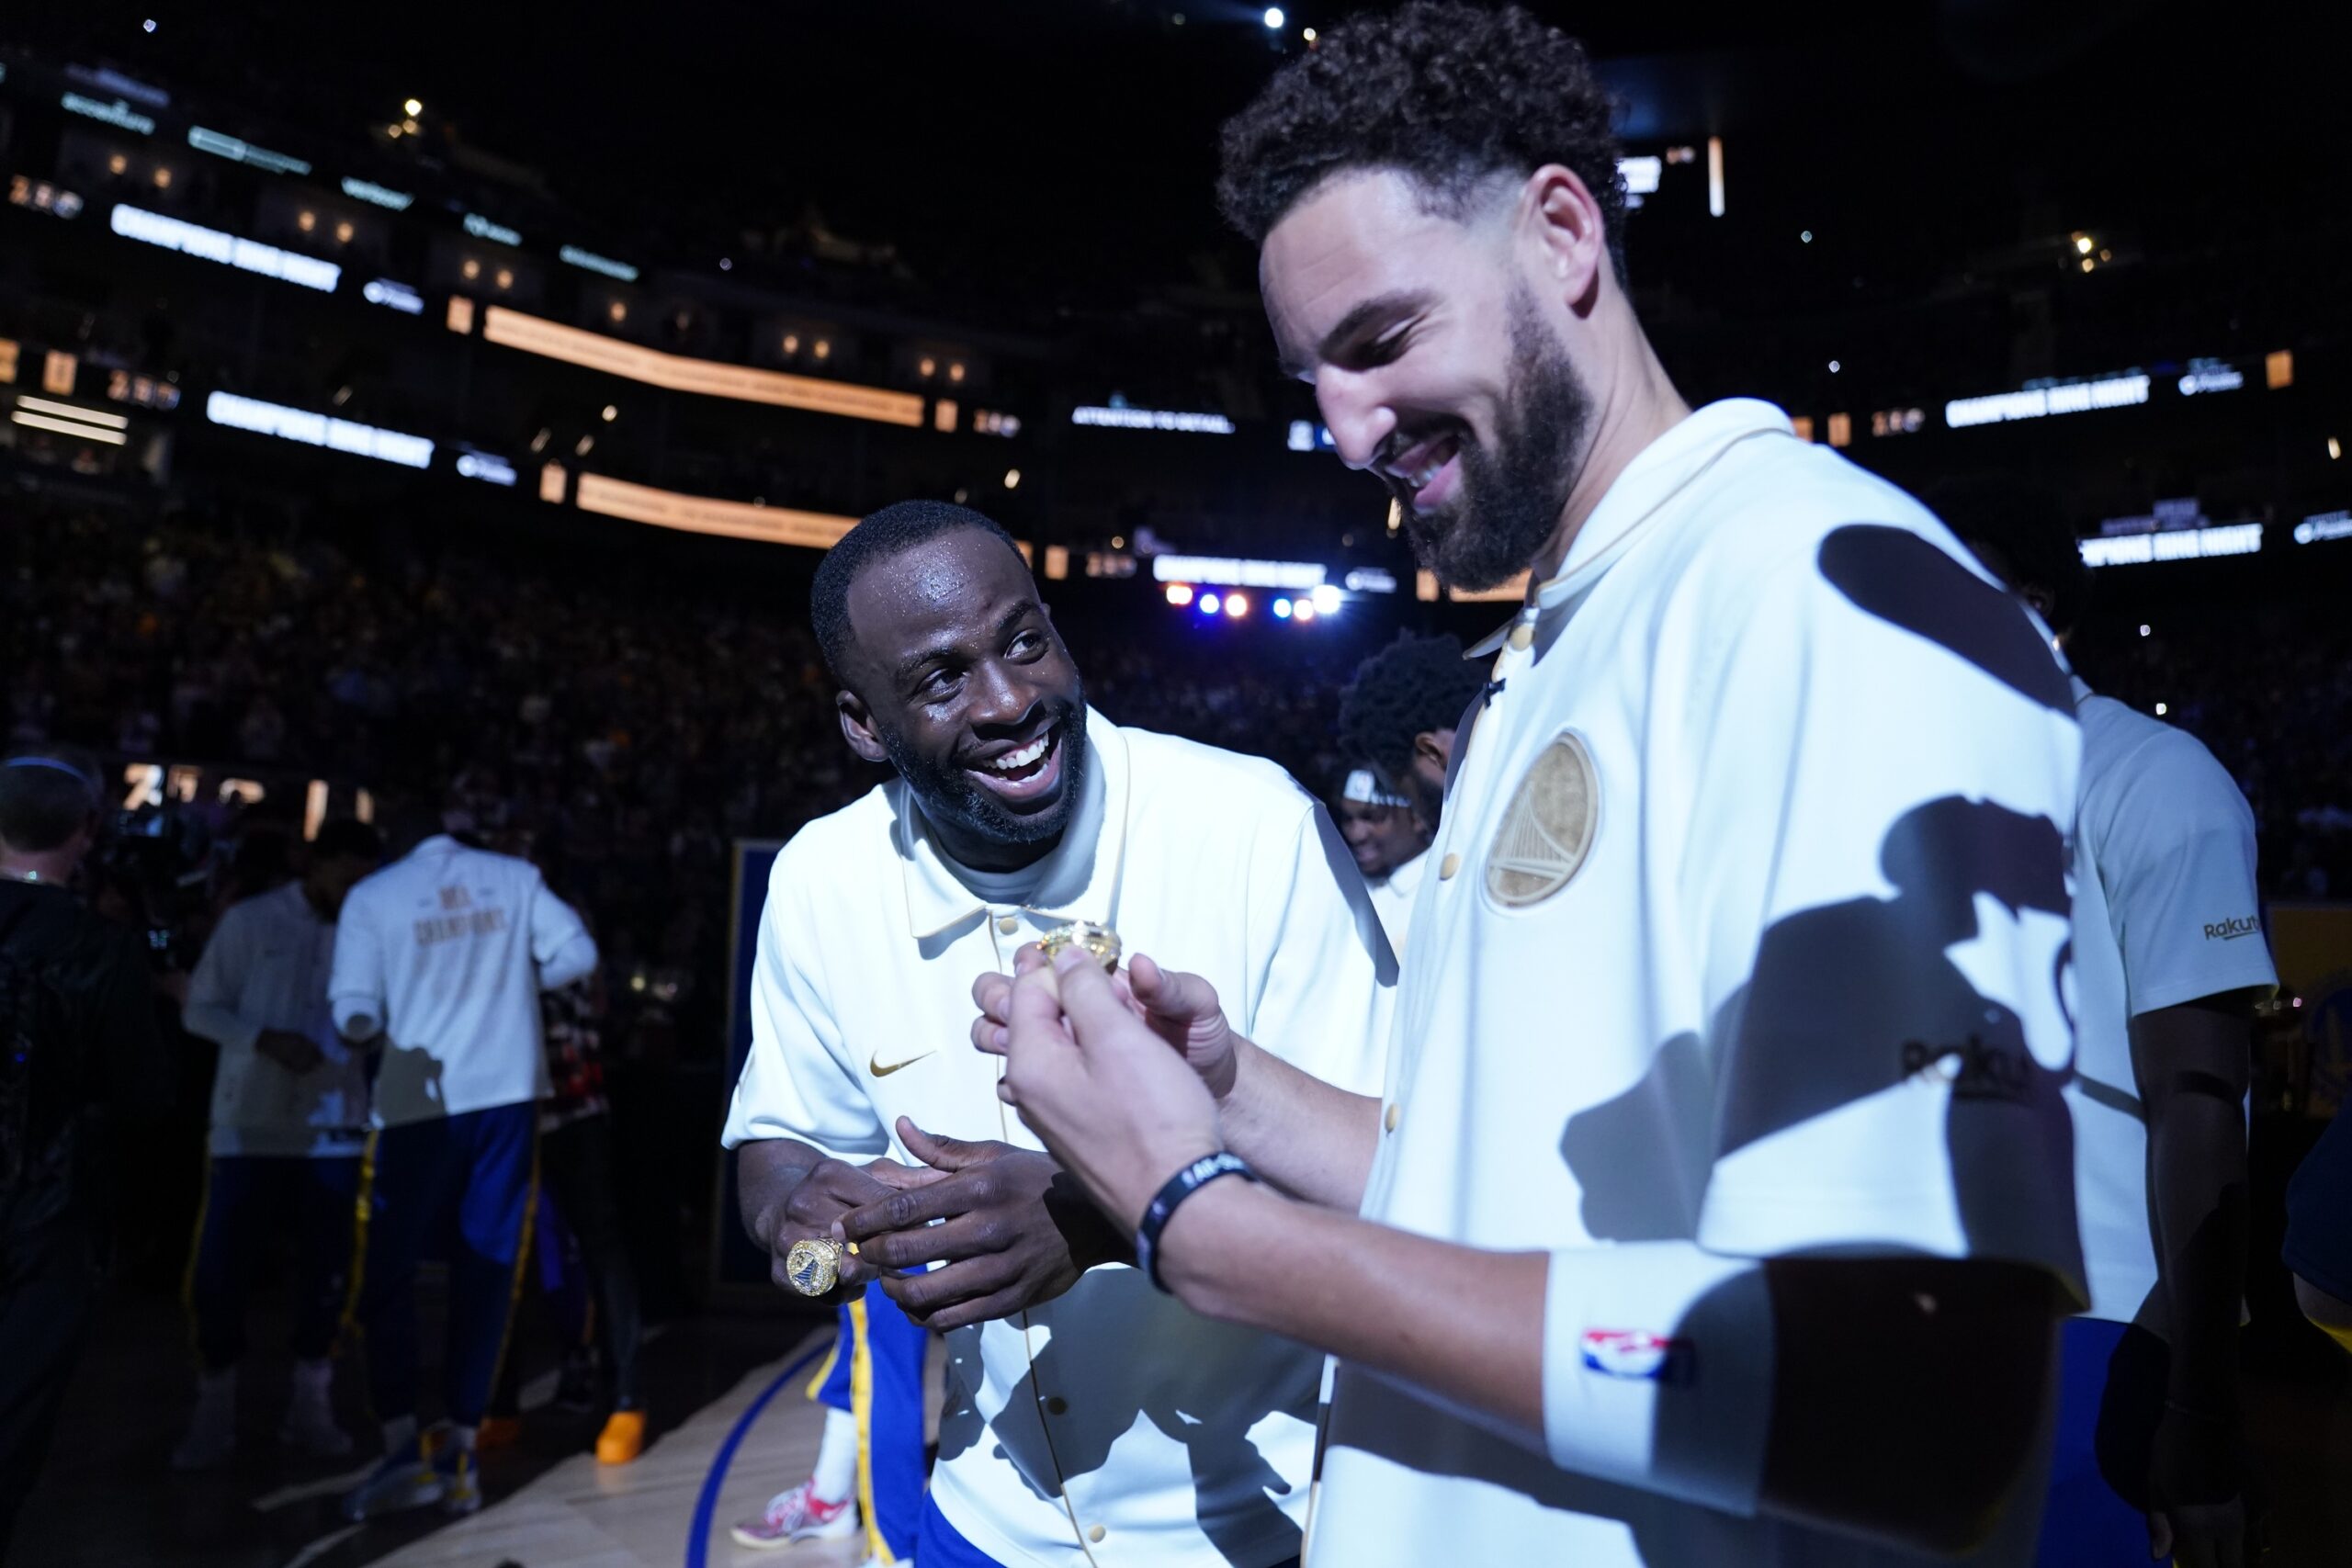 October 18, 2022; San Francisco, California, USA; Golden State Warriors forward Draymond Green (23) and guard Klay Thompson (11) receive their championship ring before the game against the Los Angeles Lakers at Chase Center. Mandatory Credit: Kyle Terada-USA TODAY Sports